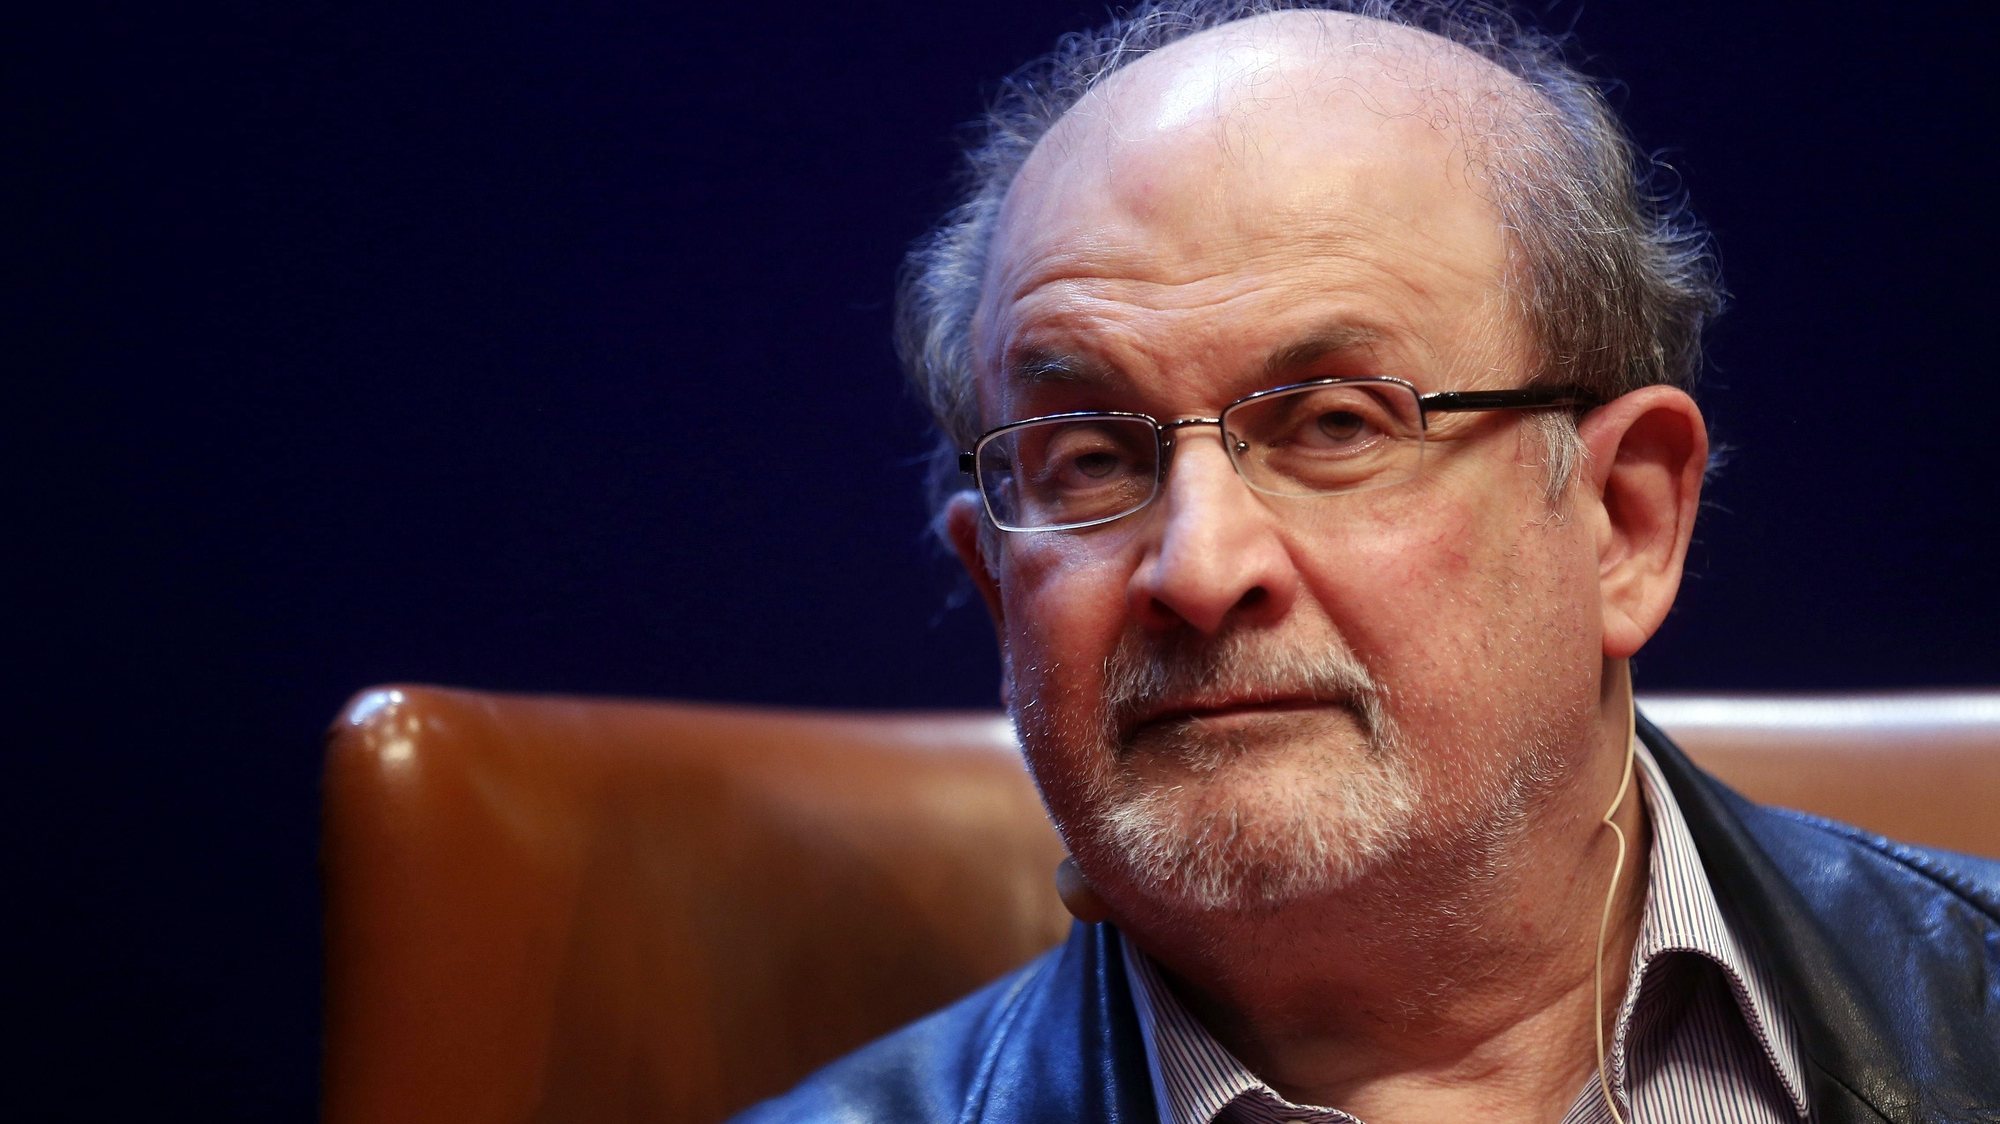 epa10117473 (FILE) - Indian-British writer Salman Rushdie presents his book &#039;Two Years Eight Months and Twenty-Eight Nights&#039; in Aviles, Spain, 07 October 2015 (reissued 12 August 2022). Rushdie and an interviewer were attacked while on stage at an event in Chautauqua, New York State, USA, on 12 August 2022. The suspect was taken into custody, New York State police said. Rushdie, who was apparently stabbed in the neck, was transported to a hospital. His condition is not yet known.  EPA/JL CEREIJIDO *** Local Caption *** 53580620